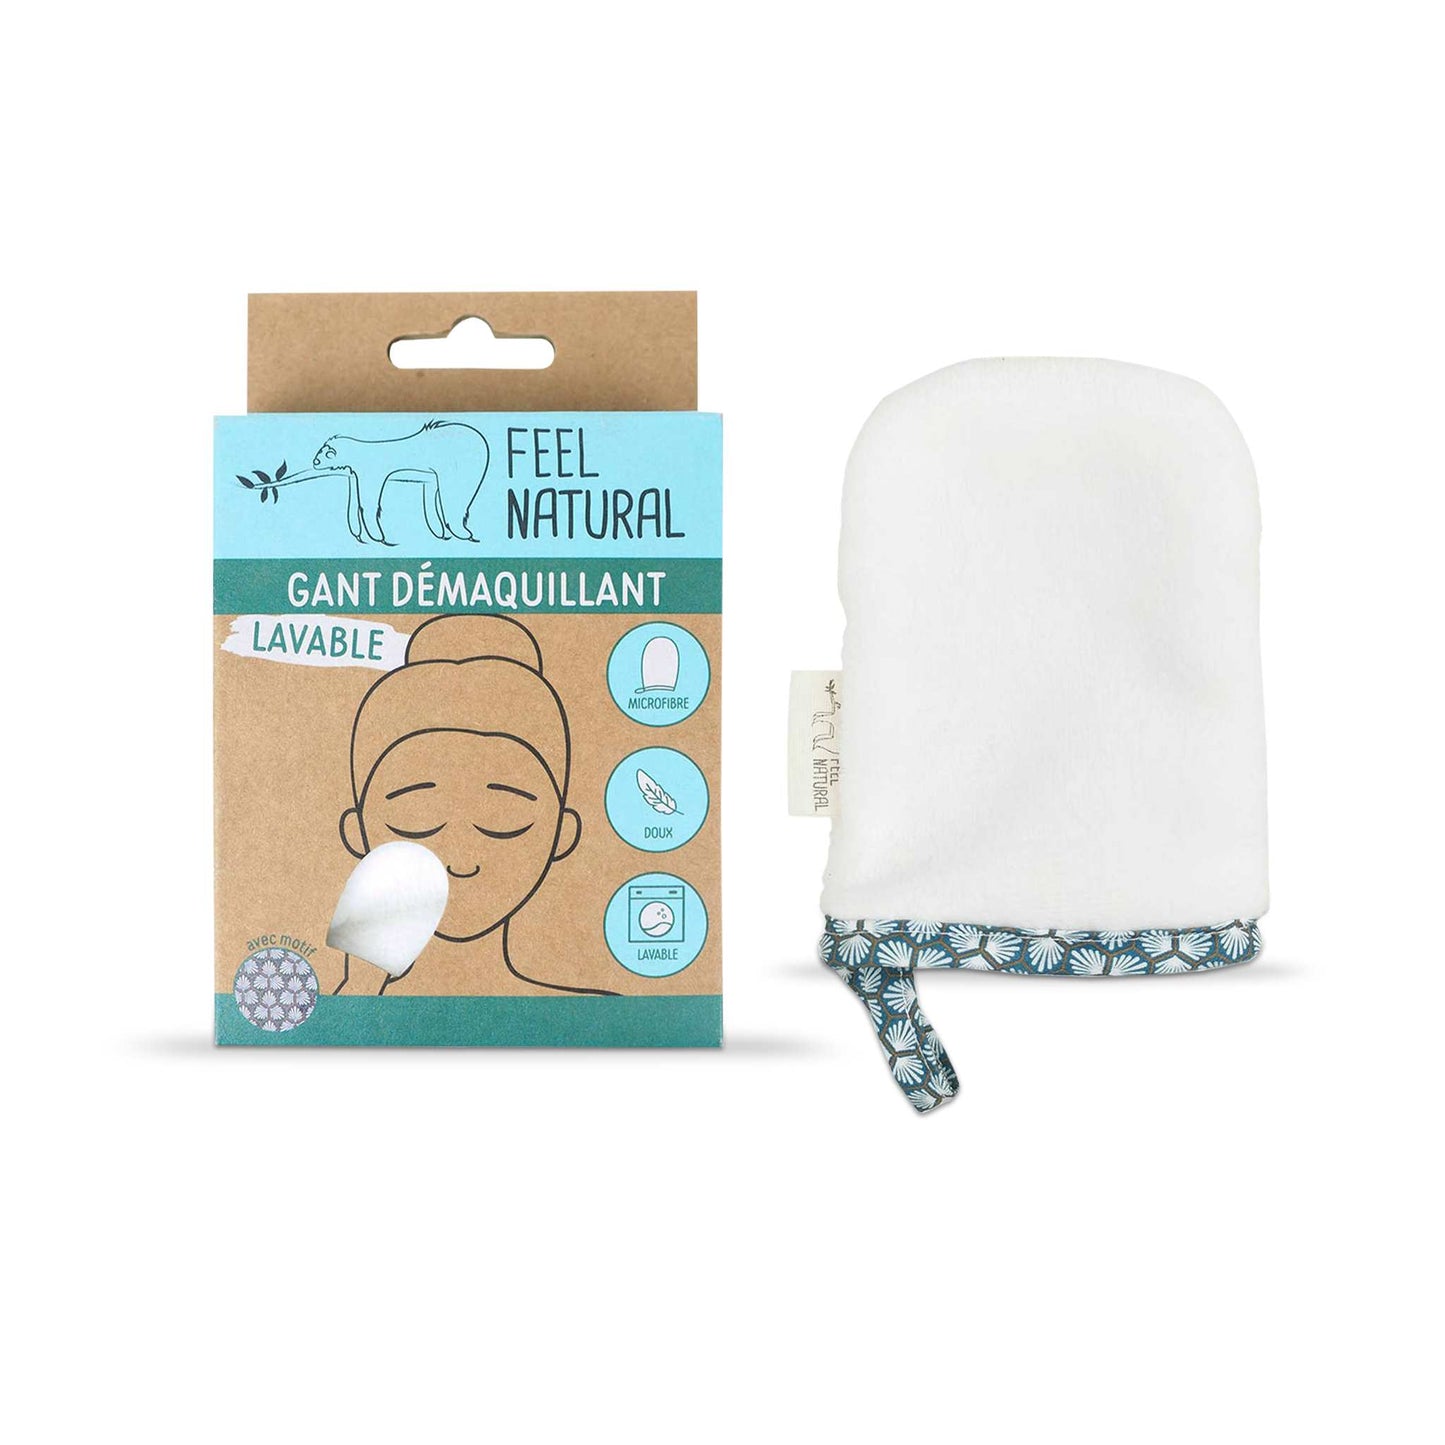 Feel Natural Makeup Removers Ultra-soft Microfiber Washable Makeup Remover Glove - Feel Natural